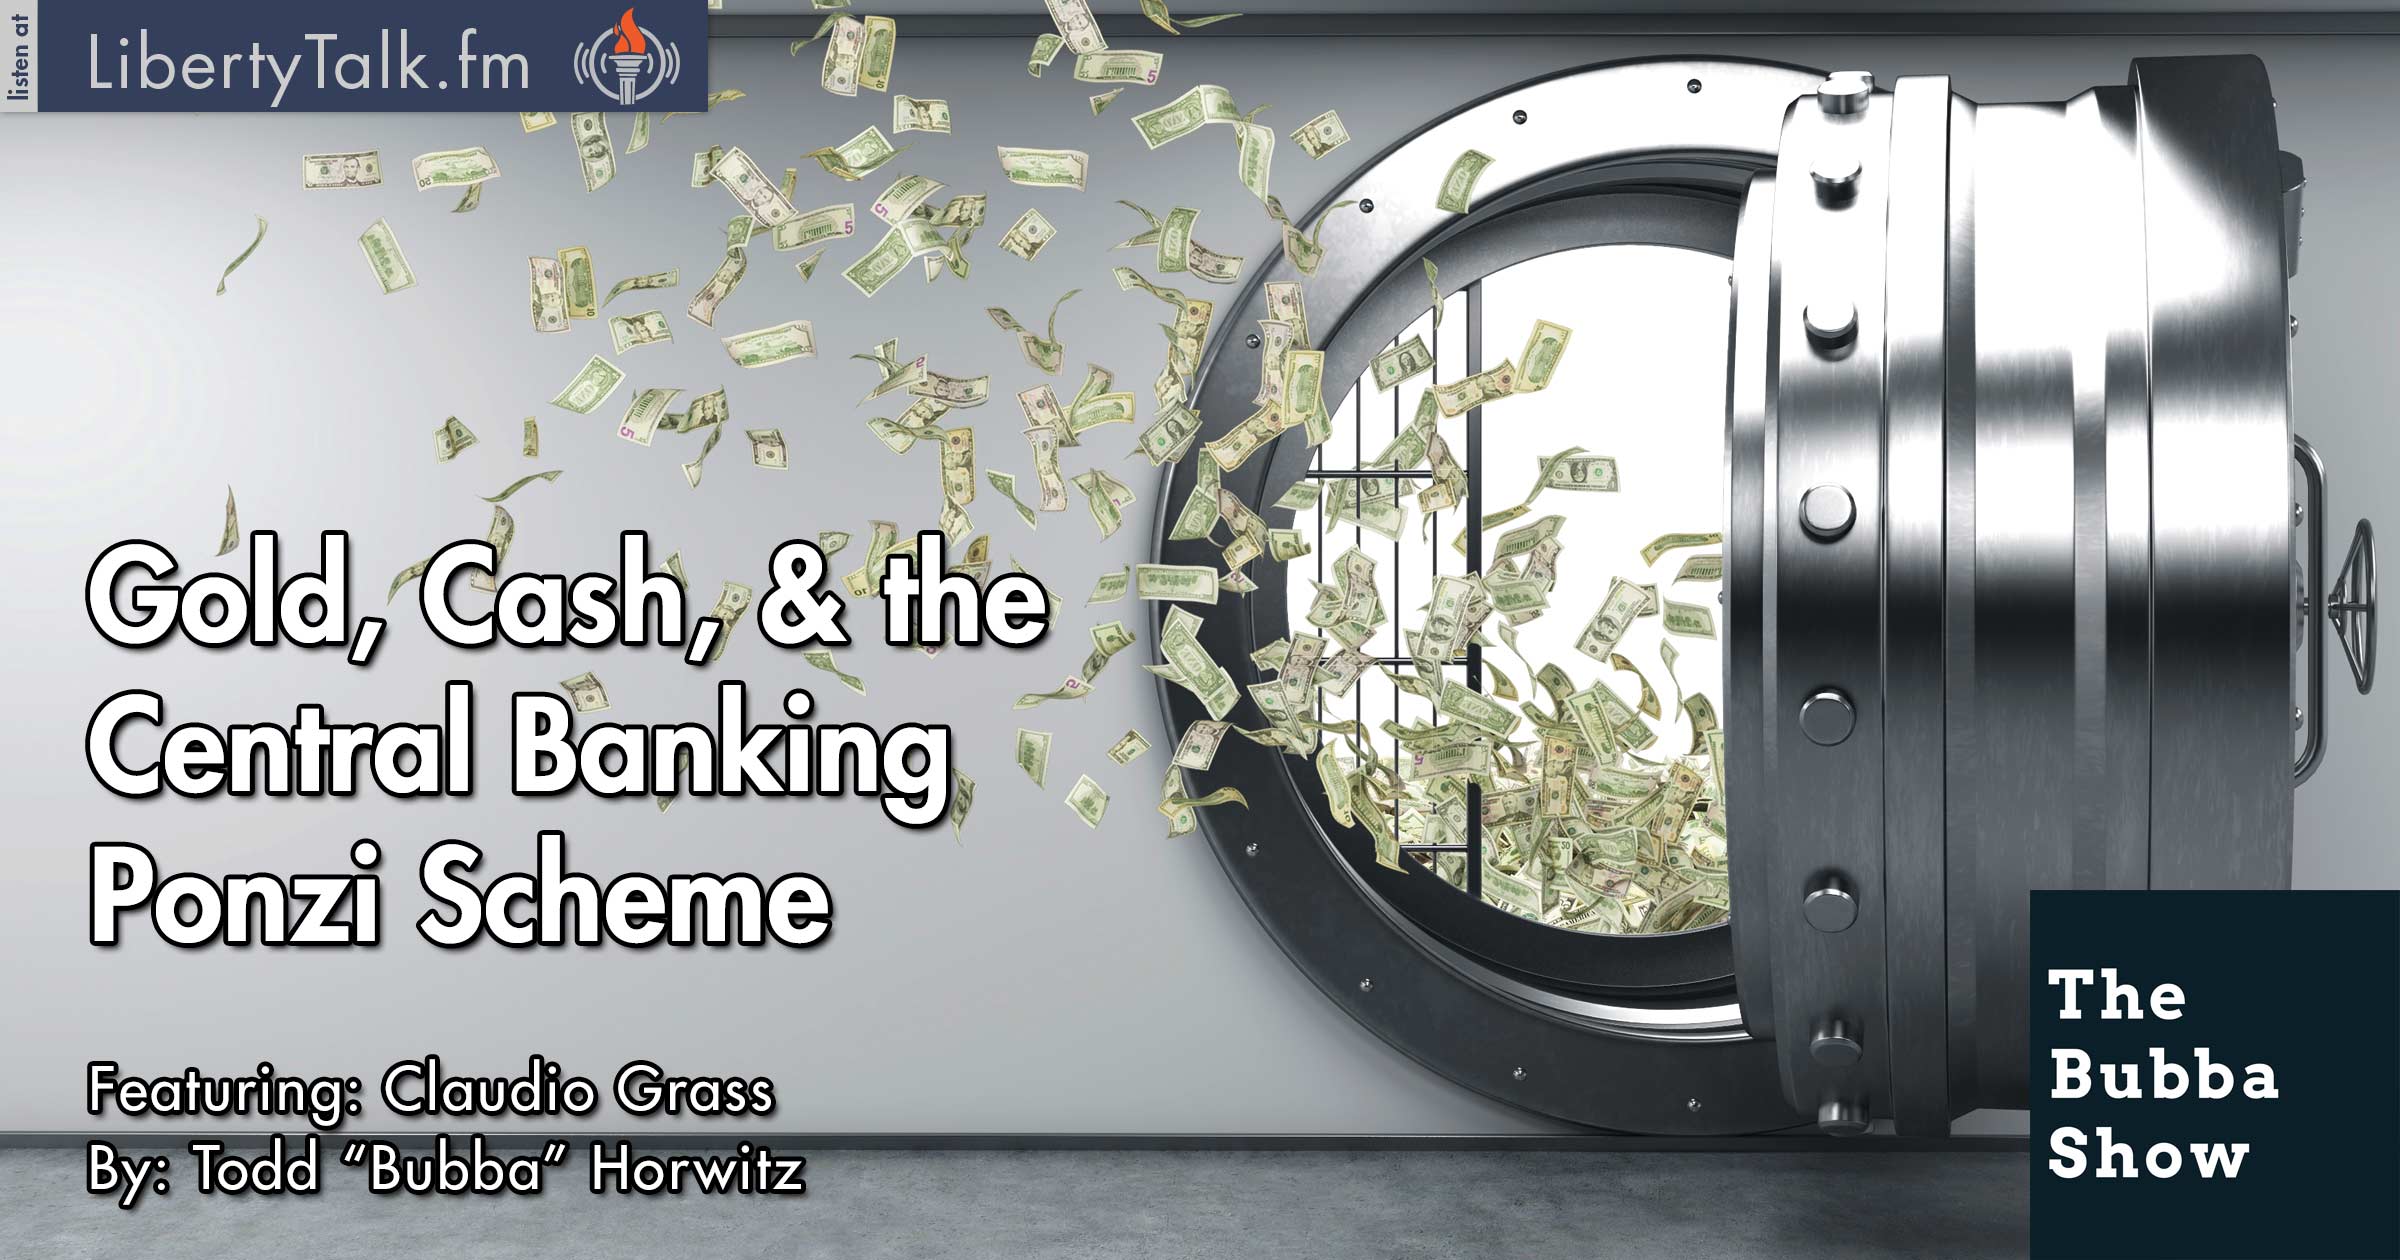 Gold, Cash, and the Central Banking Ponzi Scheme - The Bubba Show